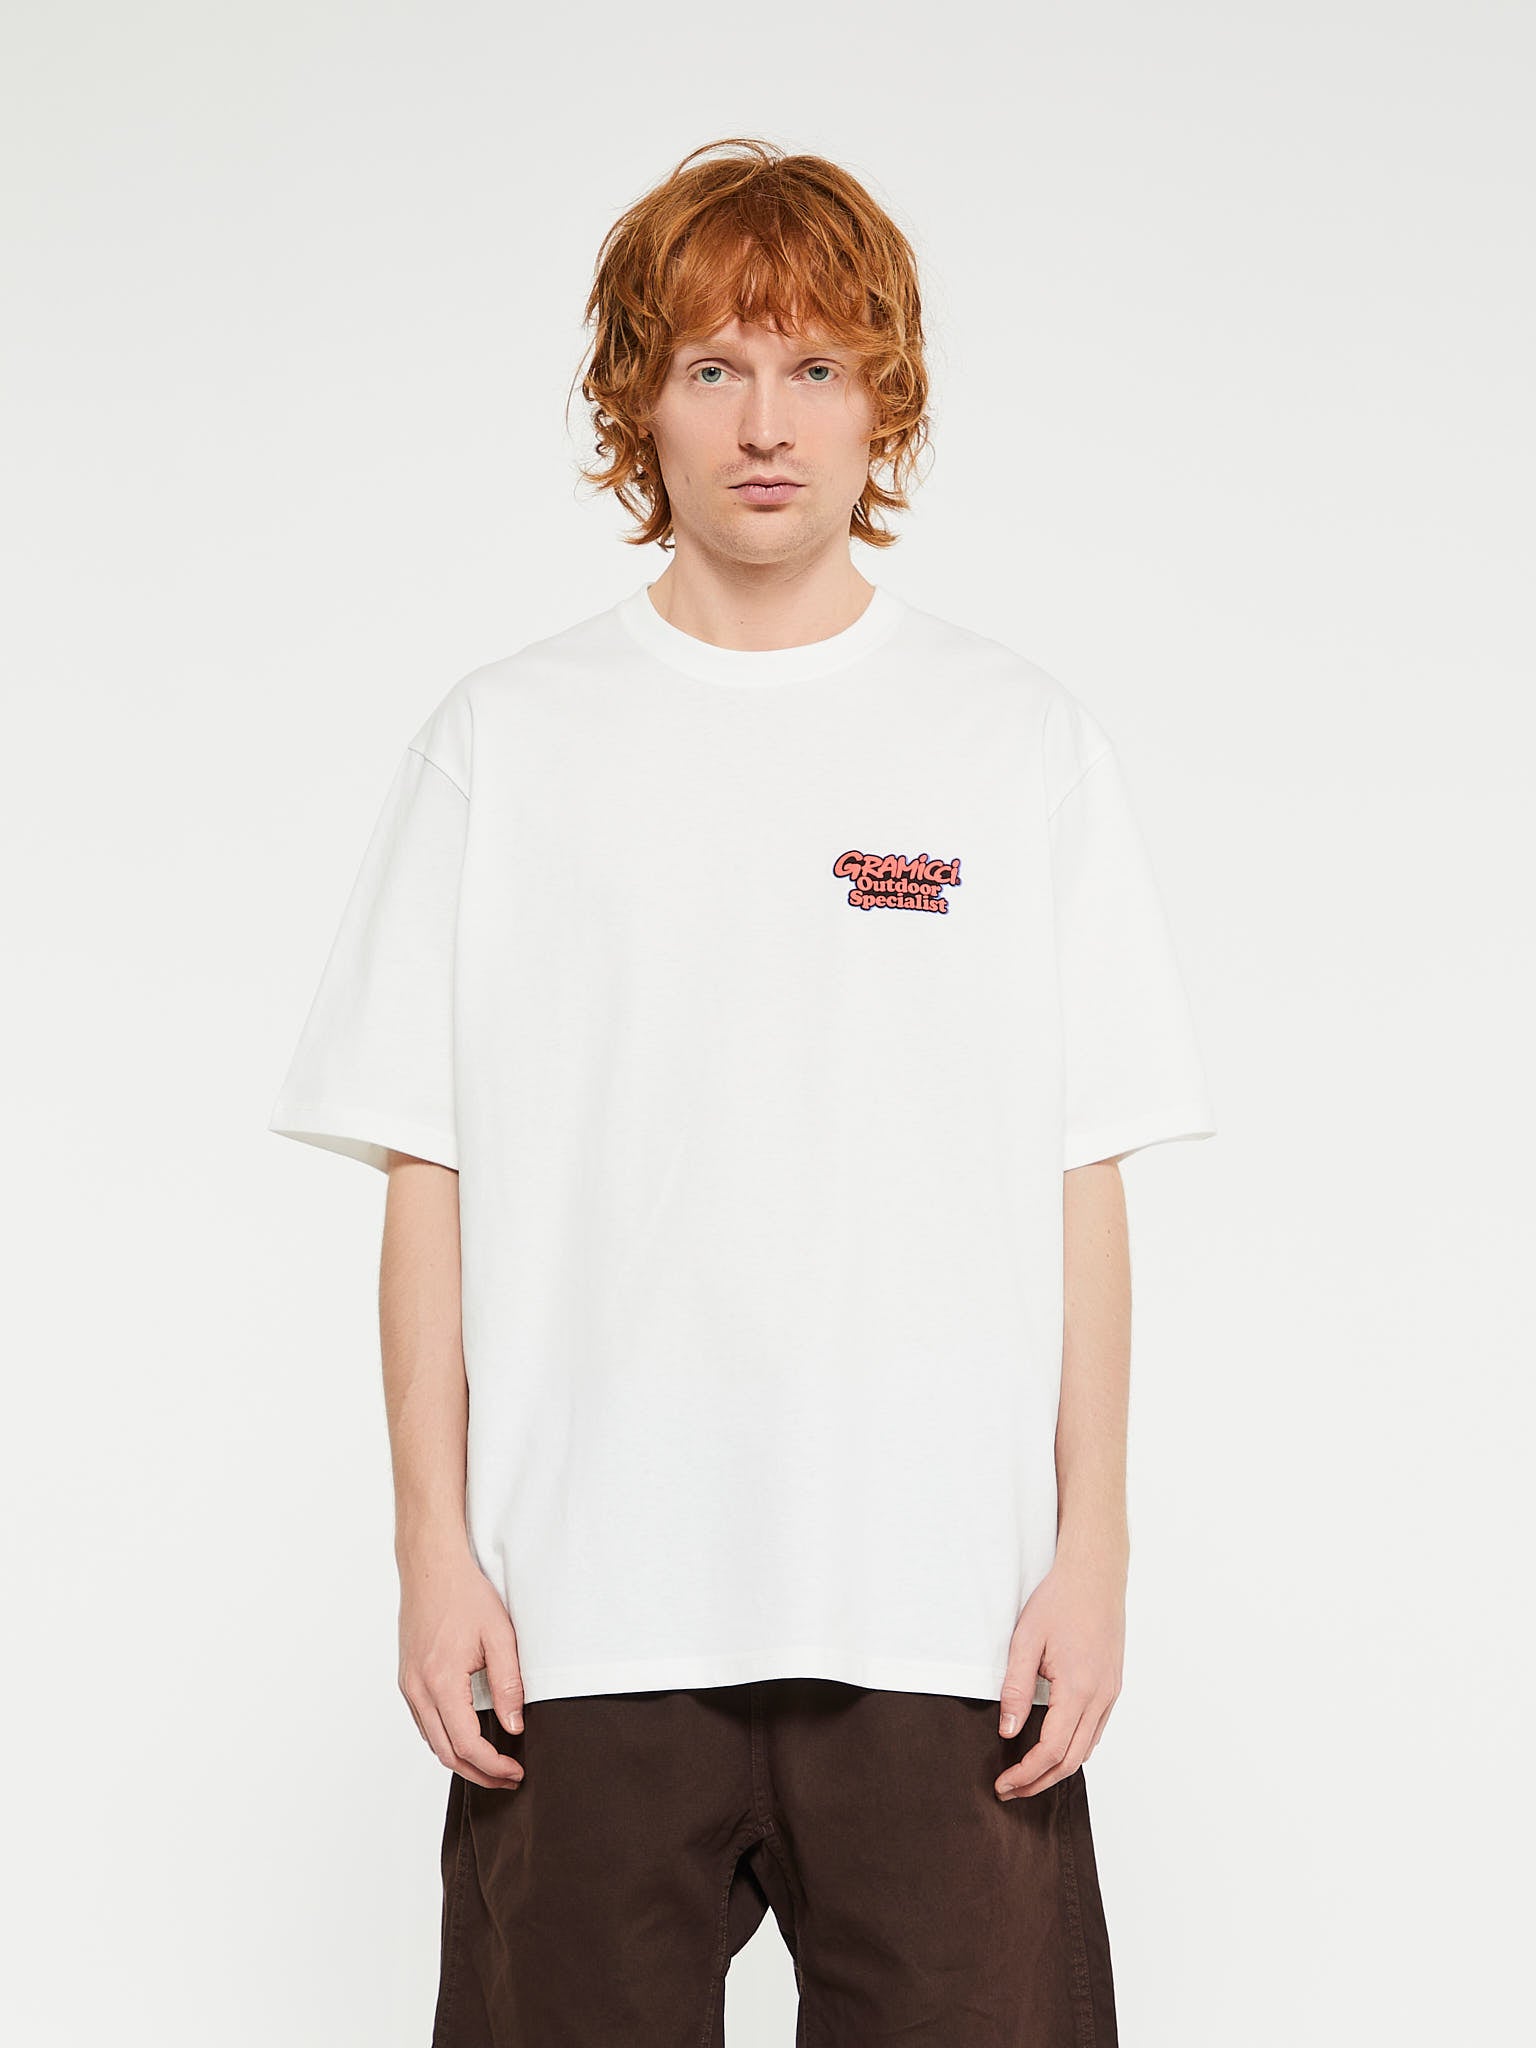 Gramicci - Outdoor Specialist T-Shirt in White